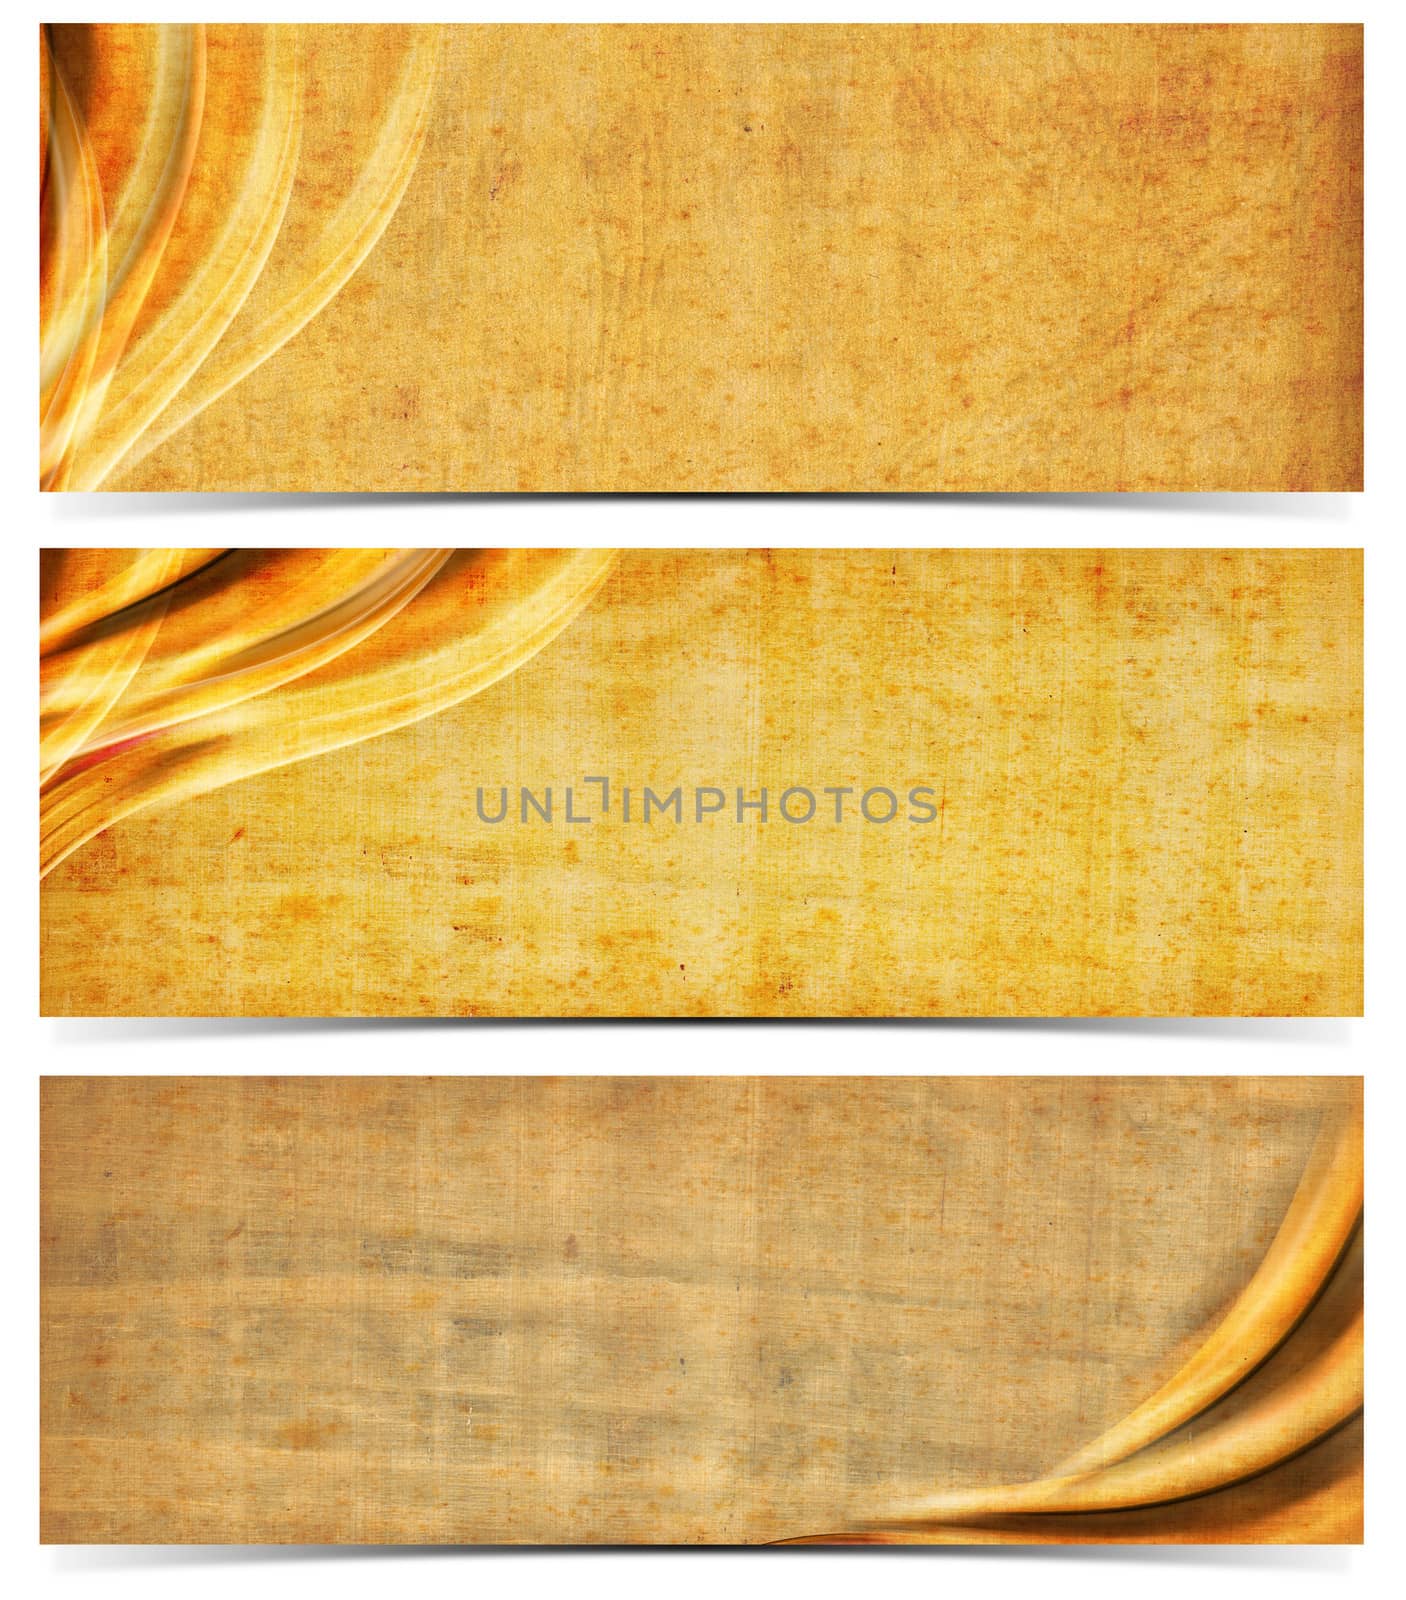 Set of three banners or headers with empty old yellowed paper with mold stains and blurred waves
